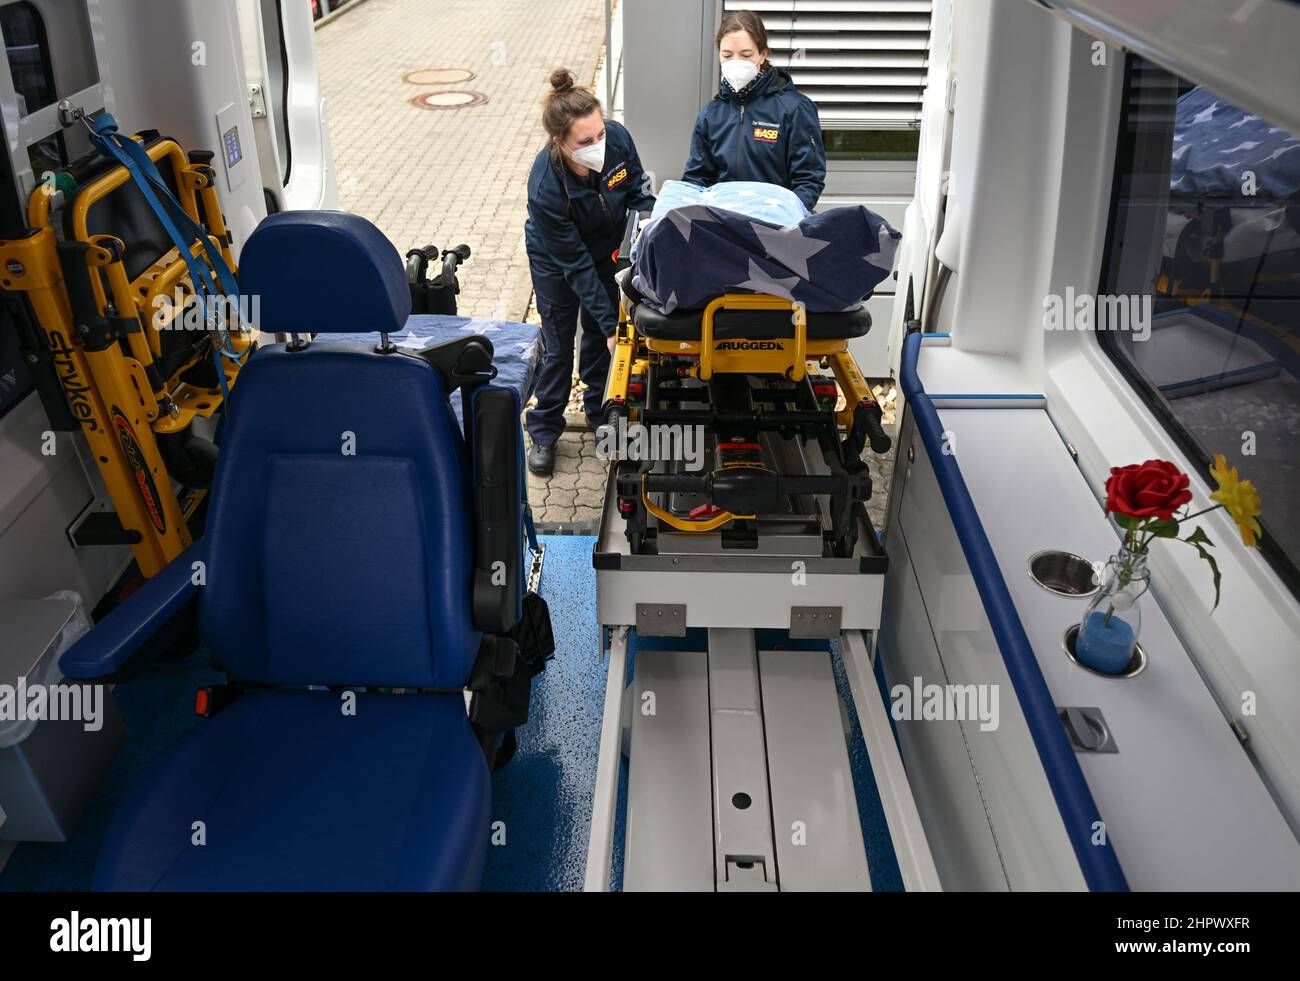 PRODUCTION - 22 February 2022, Hessen, Frankfurt/Main: Levana Clasen (l) and Michaela Loos, project coordinators at ASB, extended the special stretcher of the Wünschewagen, a medically equipped vehicle of the Arbeiter-Samariter-Bund (ASB). For five years, the ASB's Wünschewagen Rhein-Main has been driving seriously ill patients to their places of longing. The 'Wünschewagen' are on the road in all German states. The project was launched in 2014, and since then the volunteer supporters have made more than 2,000 wishes come true across Germany. The campaigns are financed exclusively by donations. Stock Photo